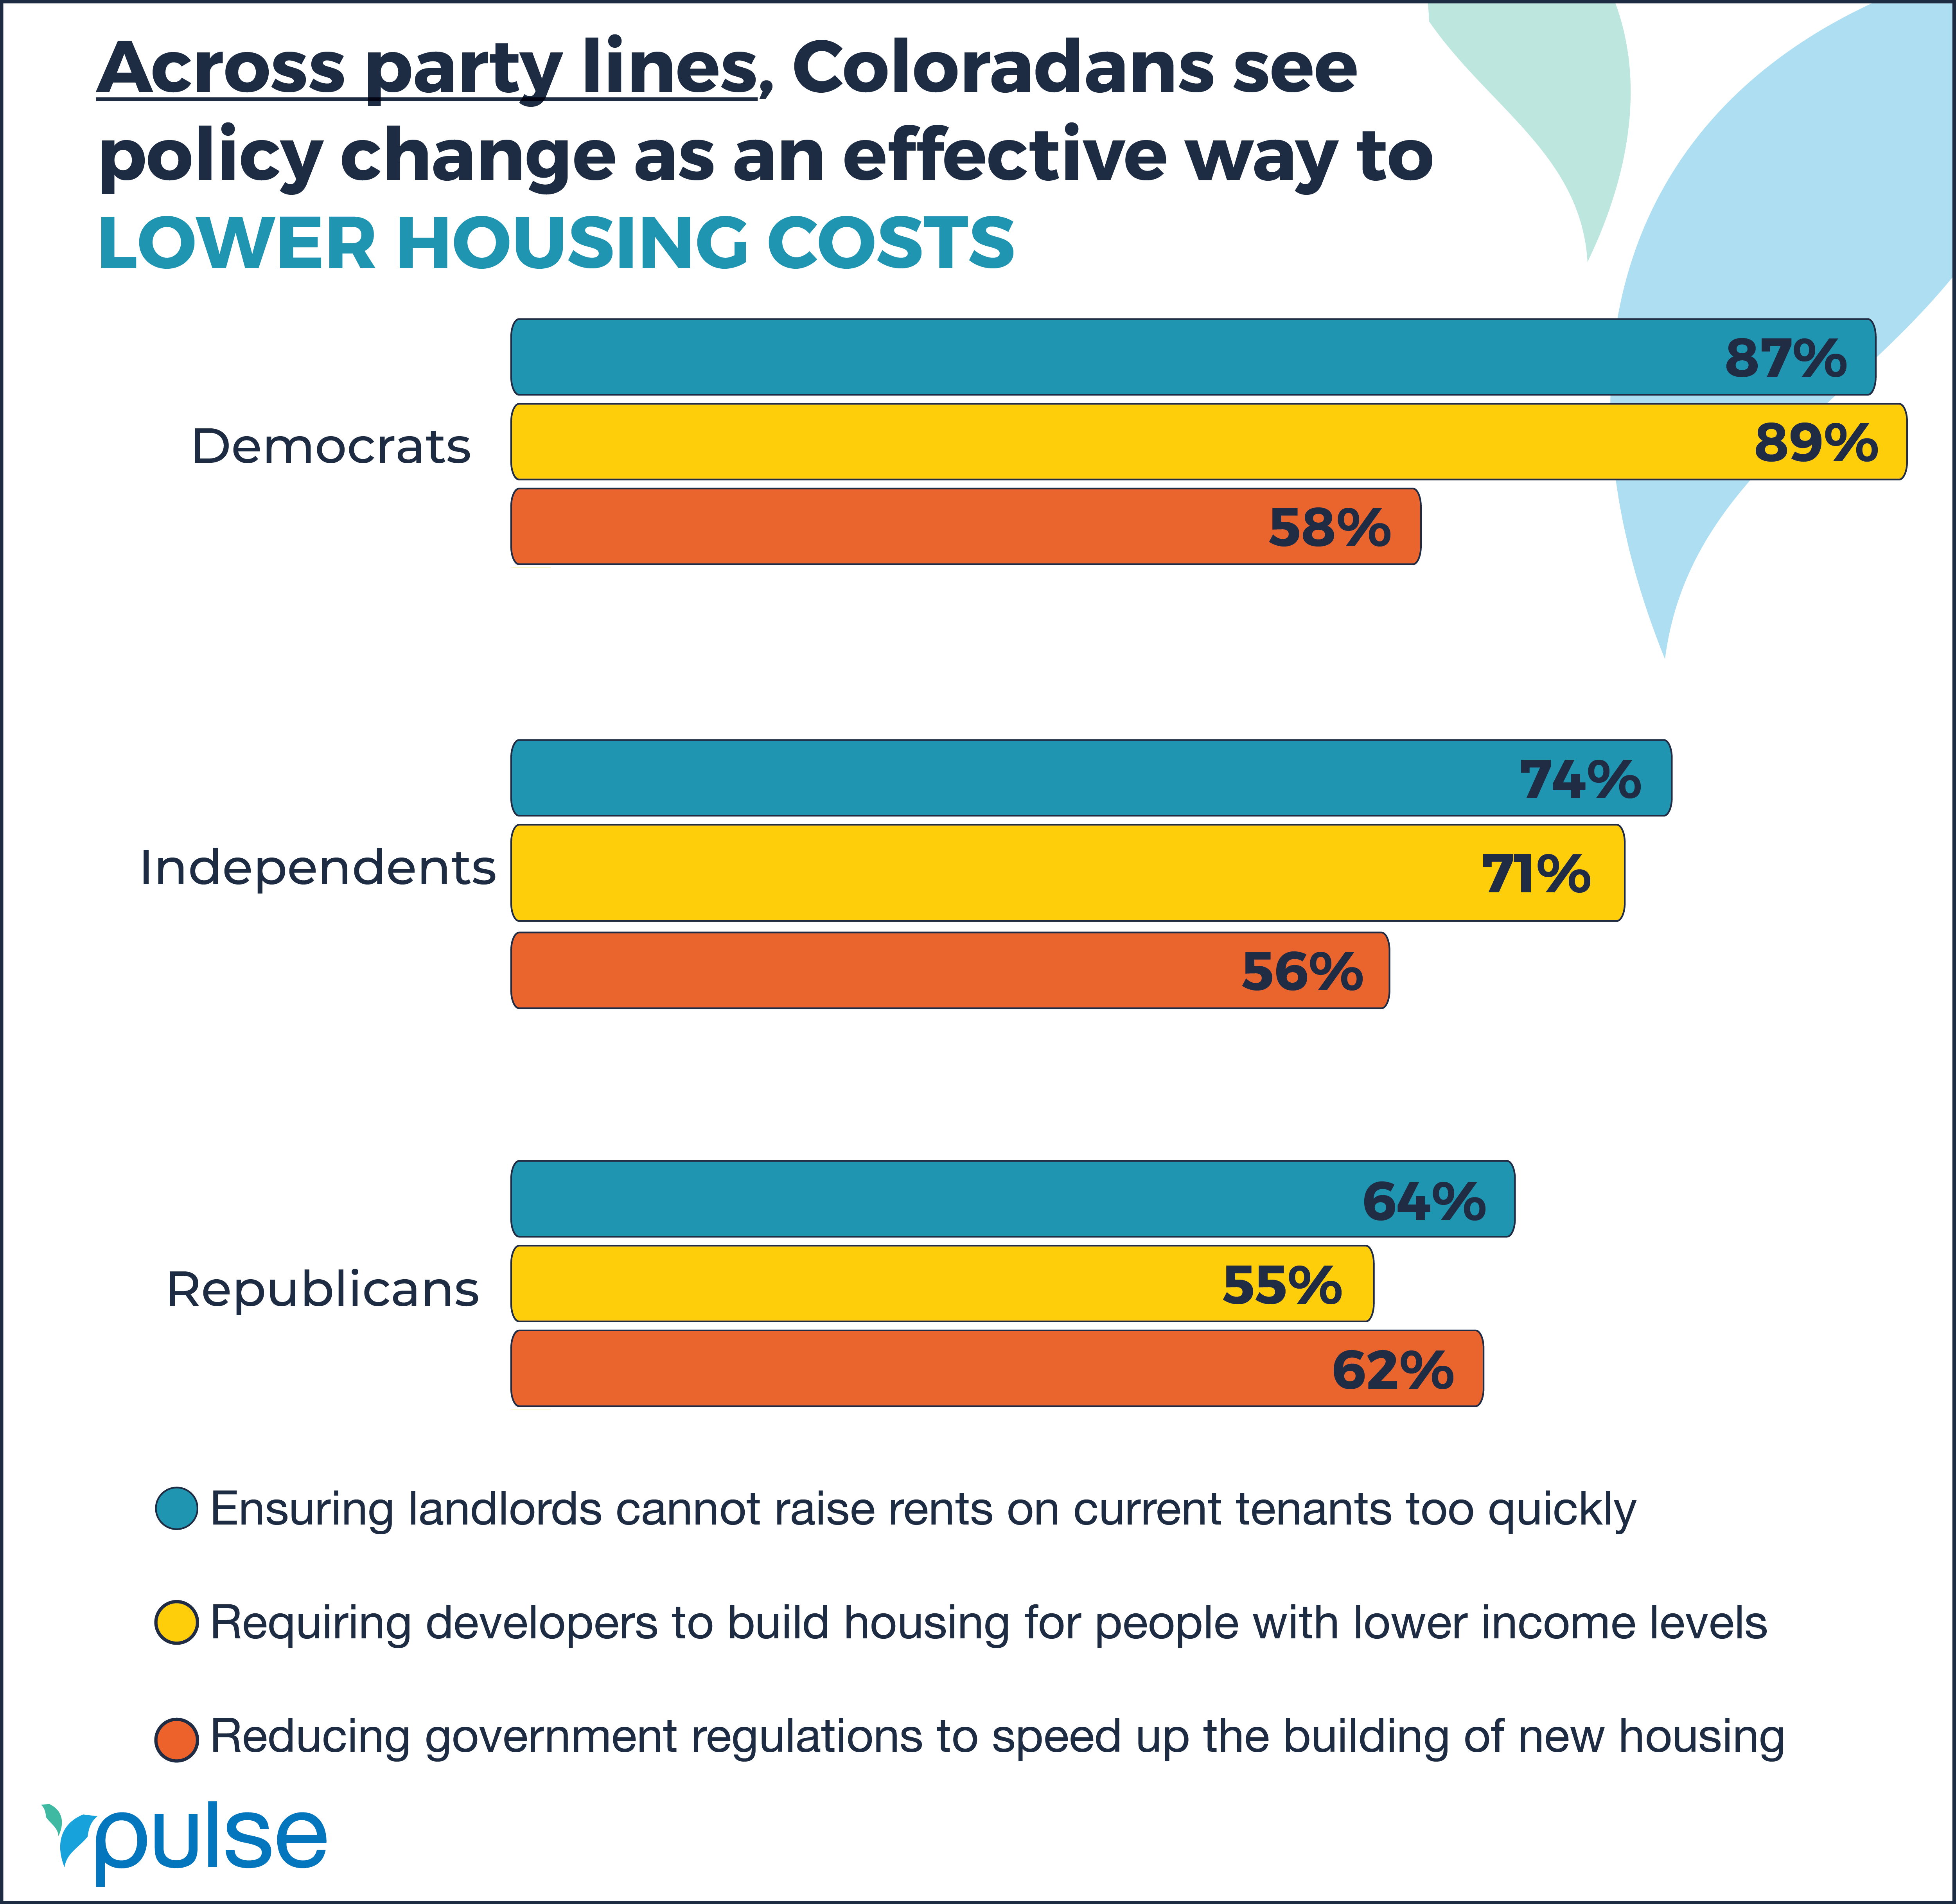 GRAPH: Across party lines, Coloradans see policy change as an effective way to lower housing costs.